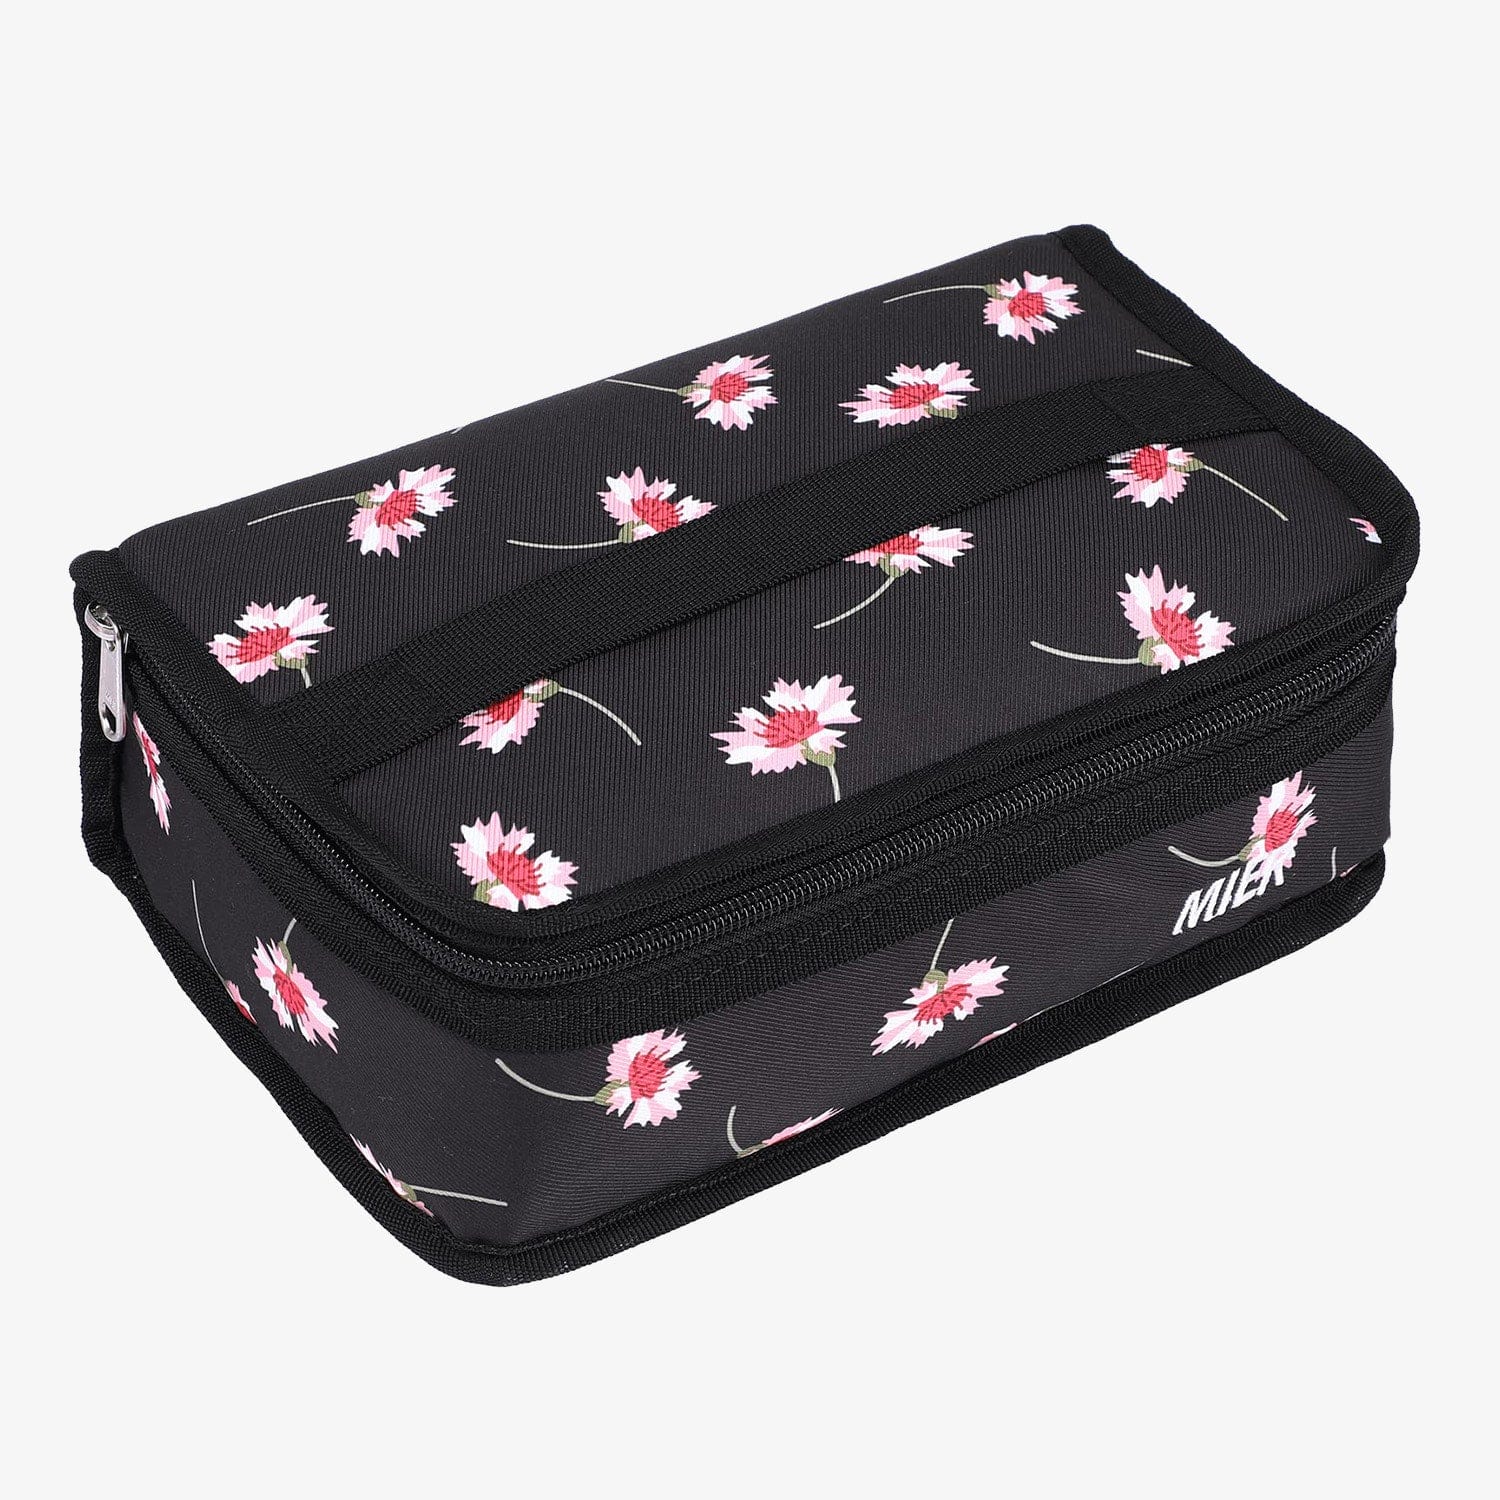 MIER 2 Compartment Kids Small Lunch Box Bag for Boys Girls Toddlers, Double  Deck Leakproof Lunchbox …See more MIER 2 Compartment Kids Small Lunch Box